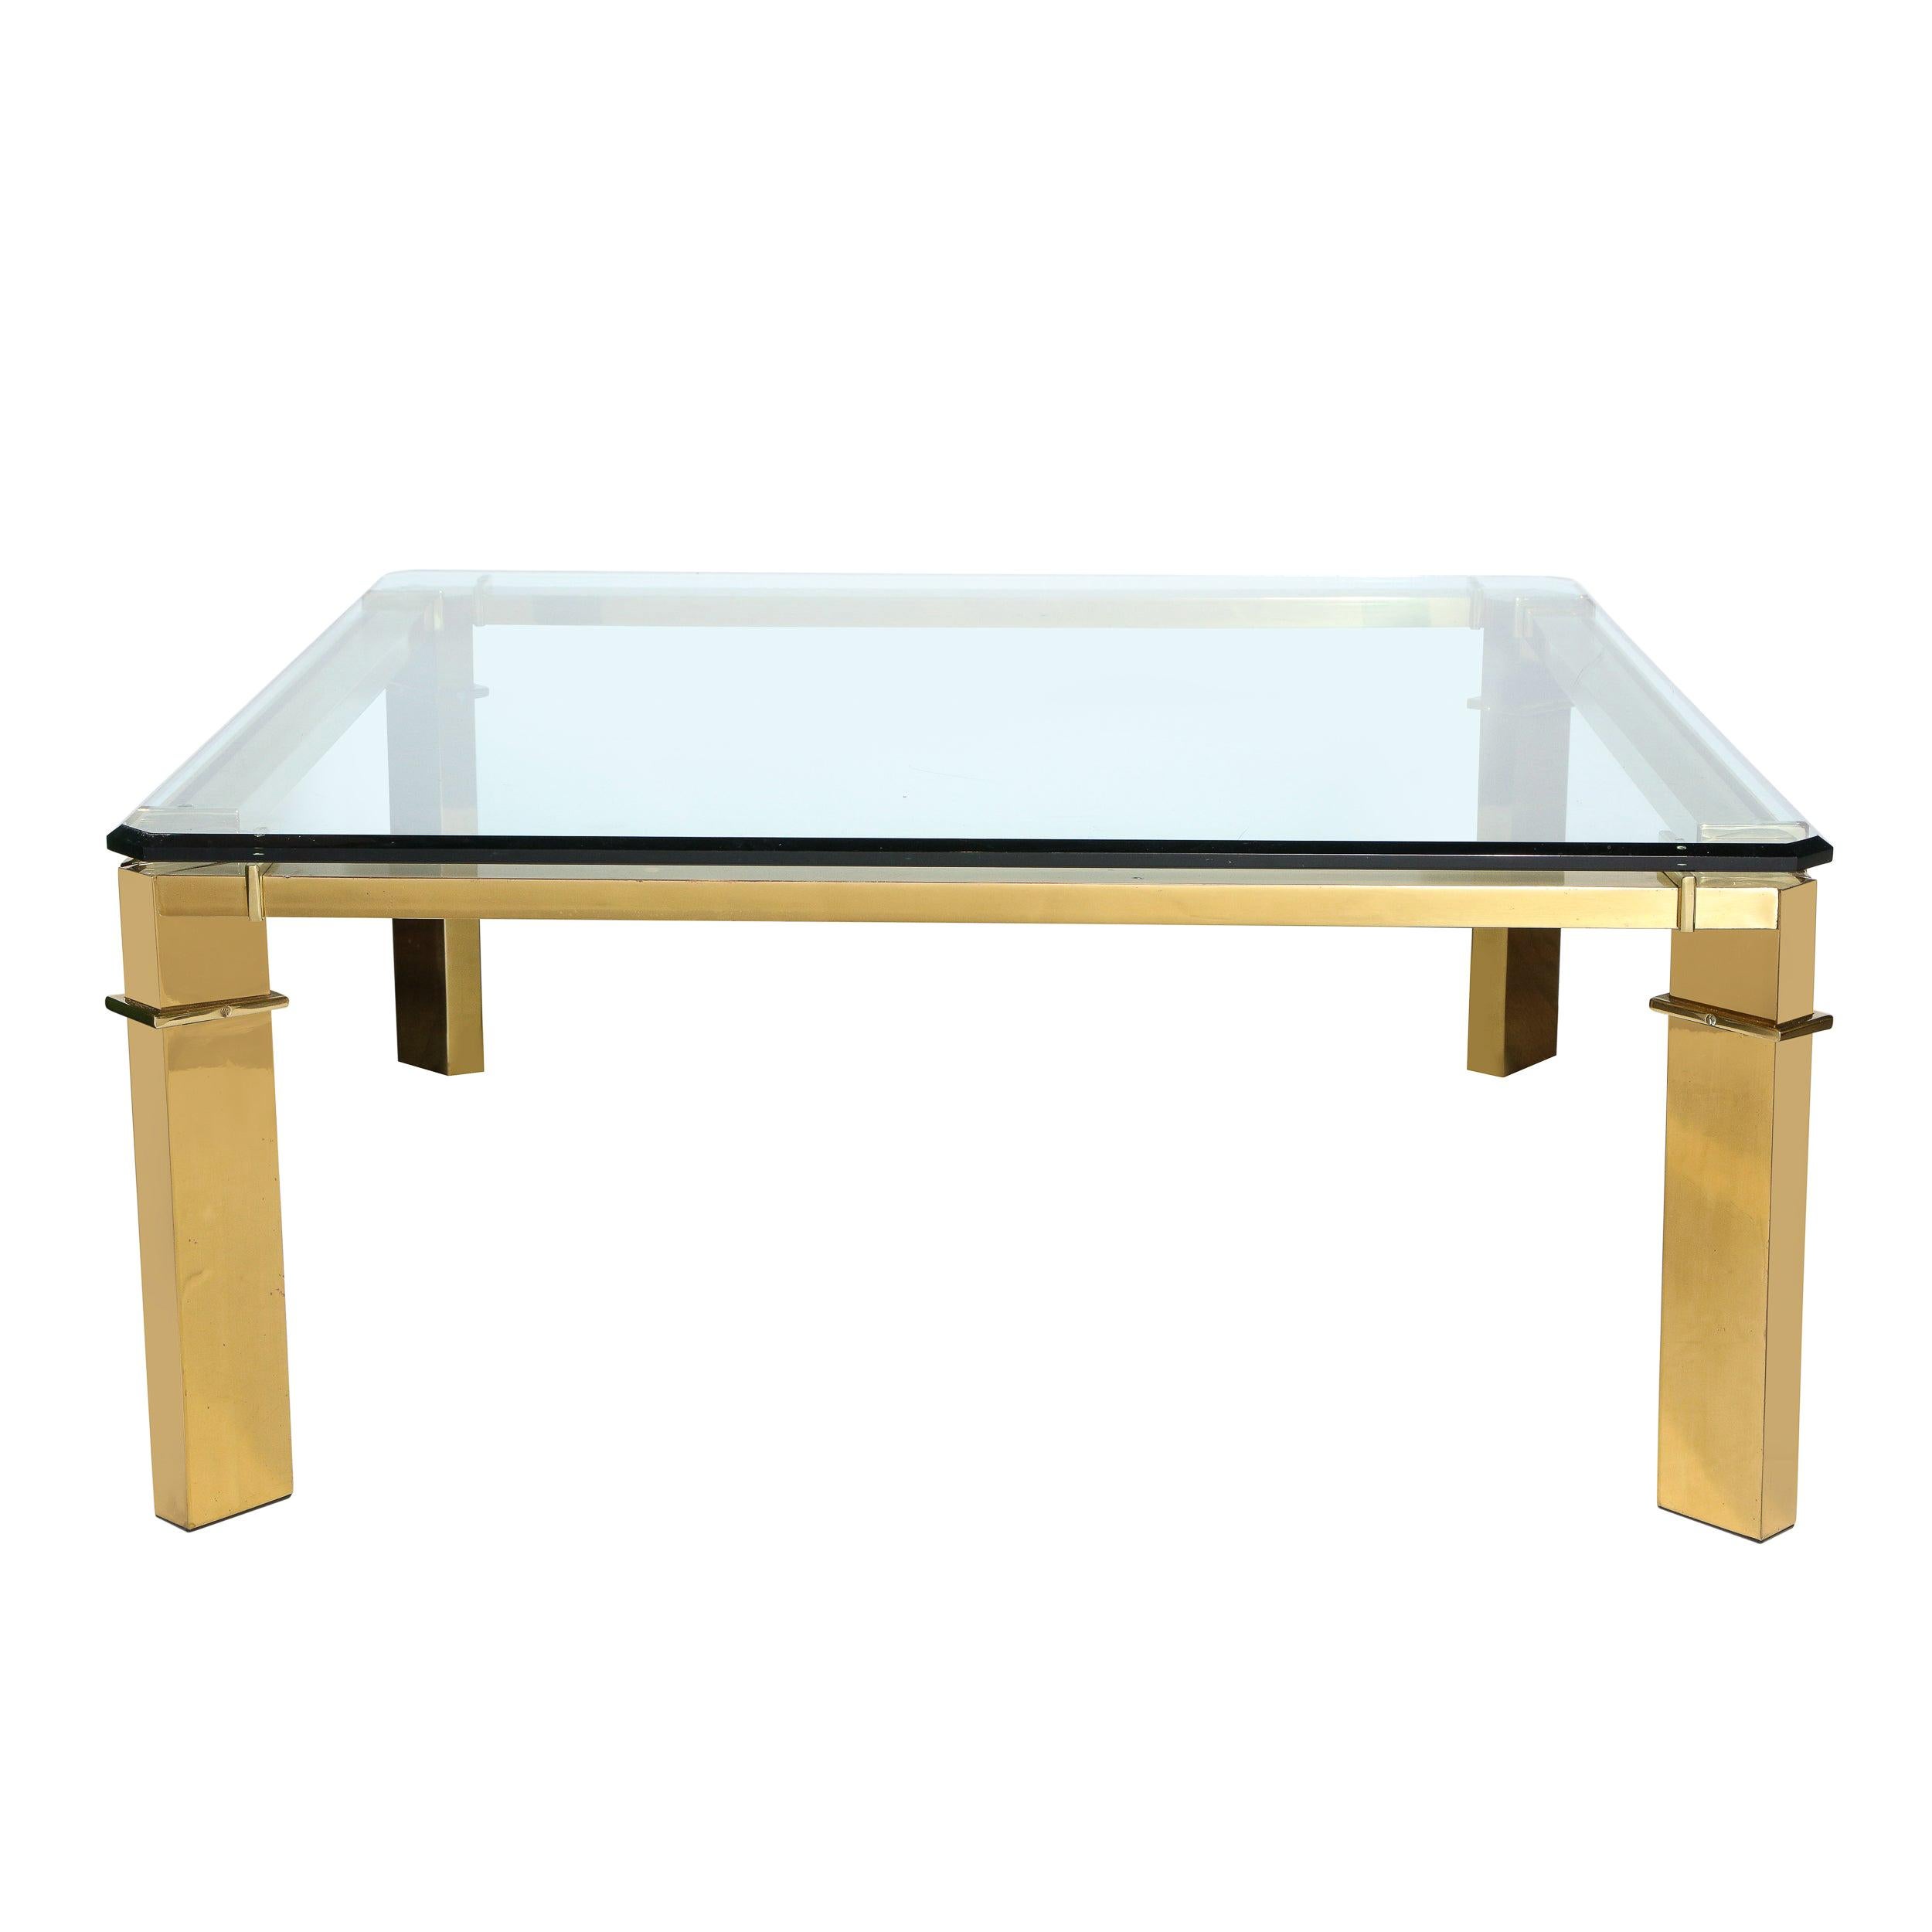 Mid-Century Modern Geometric Rectilinear Polished Brass & Glass Cocktail Table